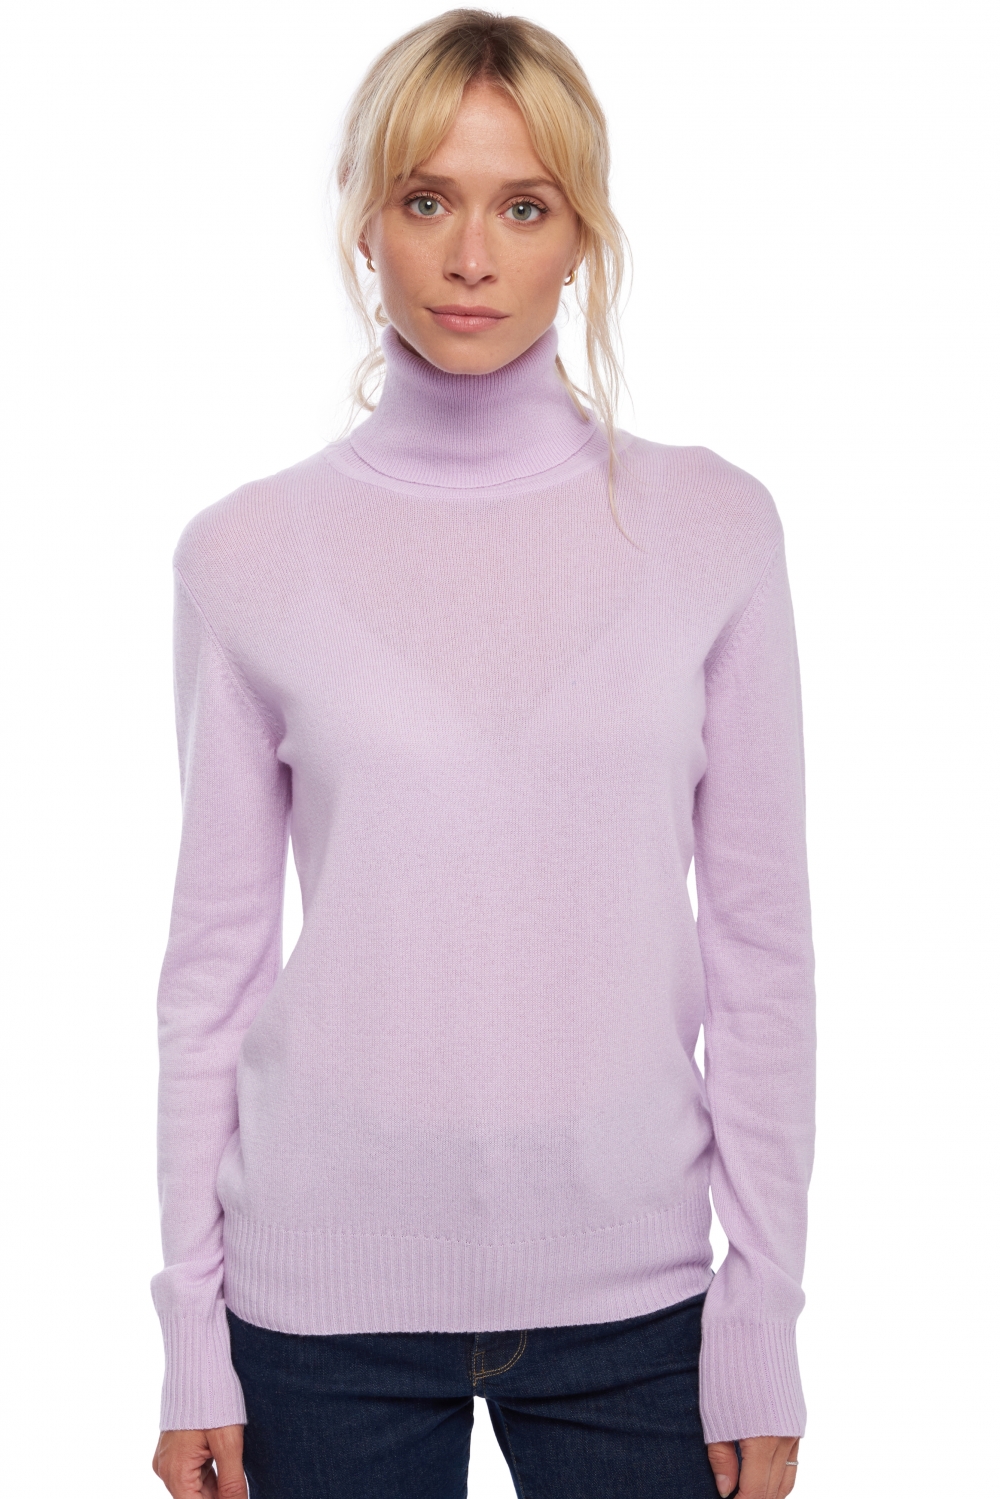 Cachemire pull femme col roule lili lilas 4xl